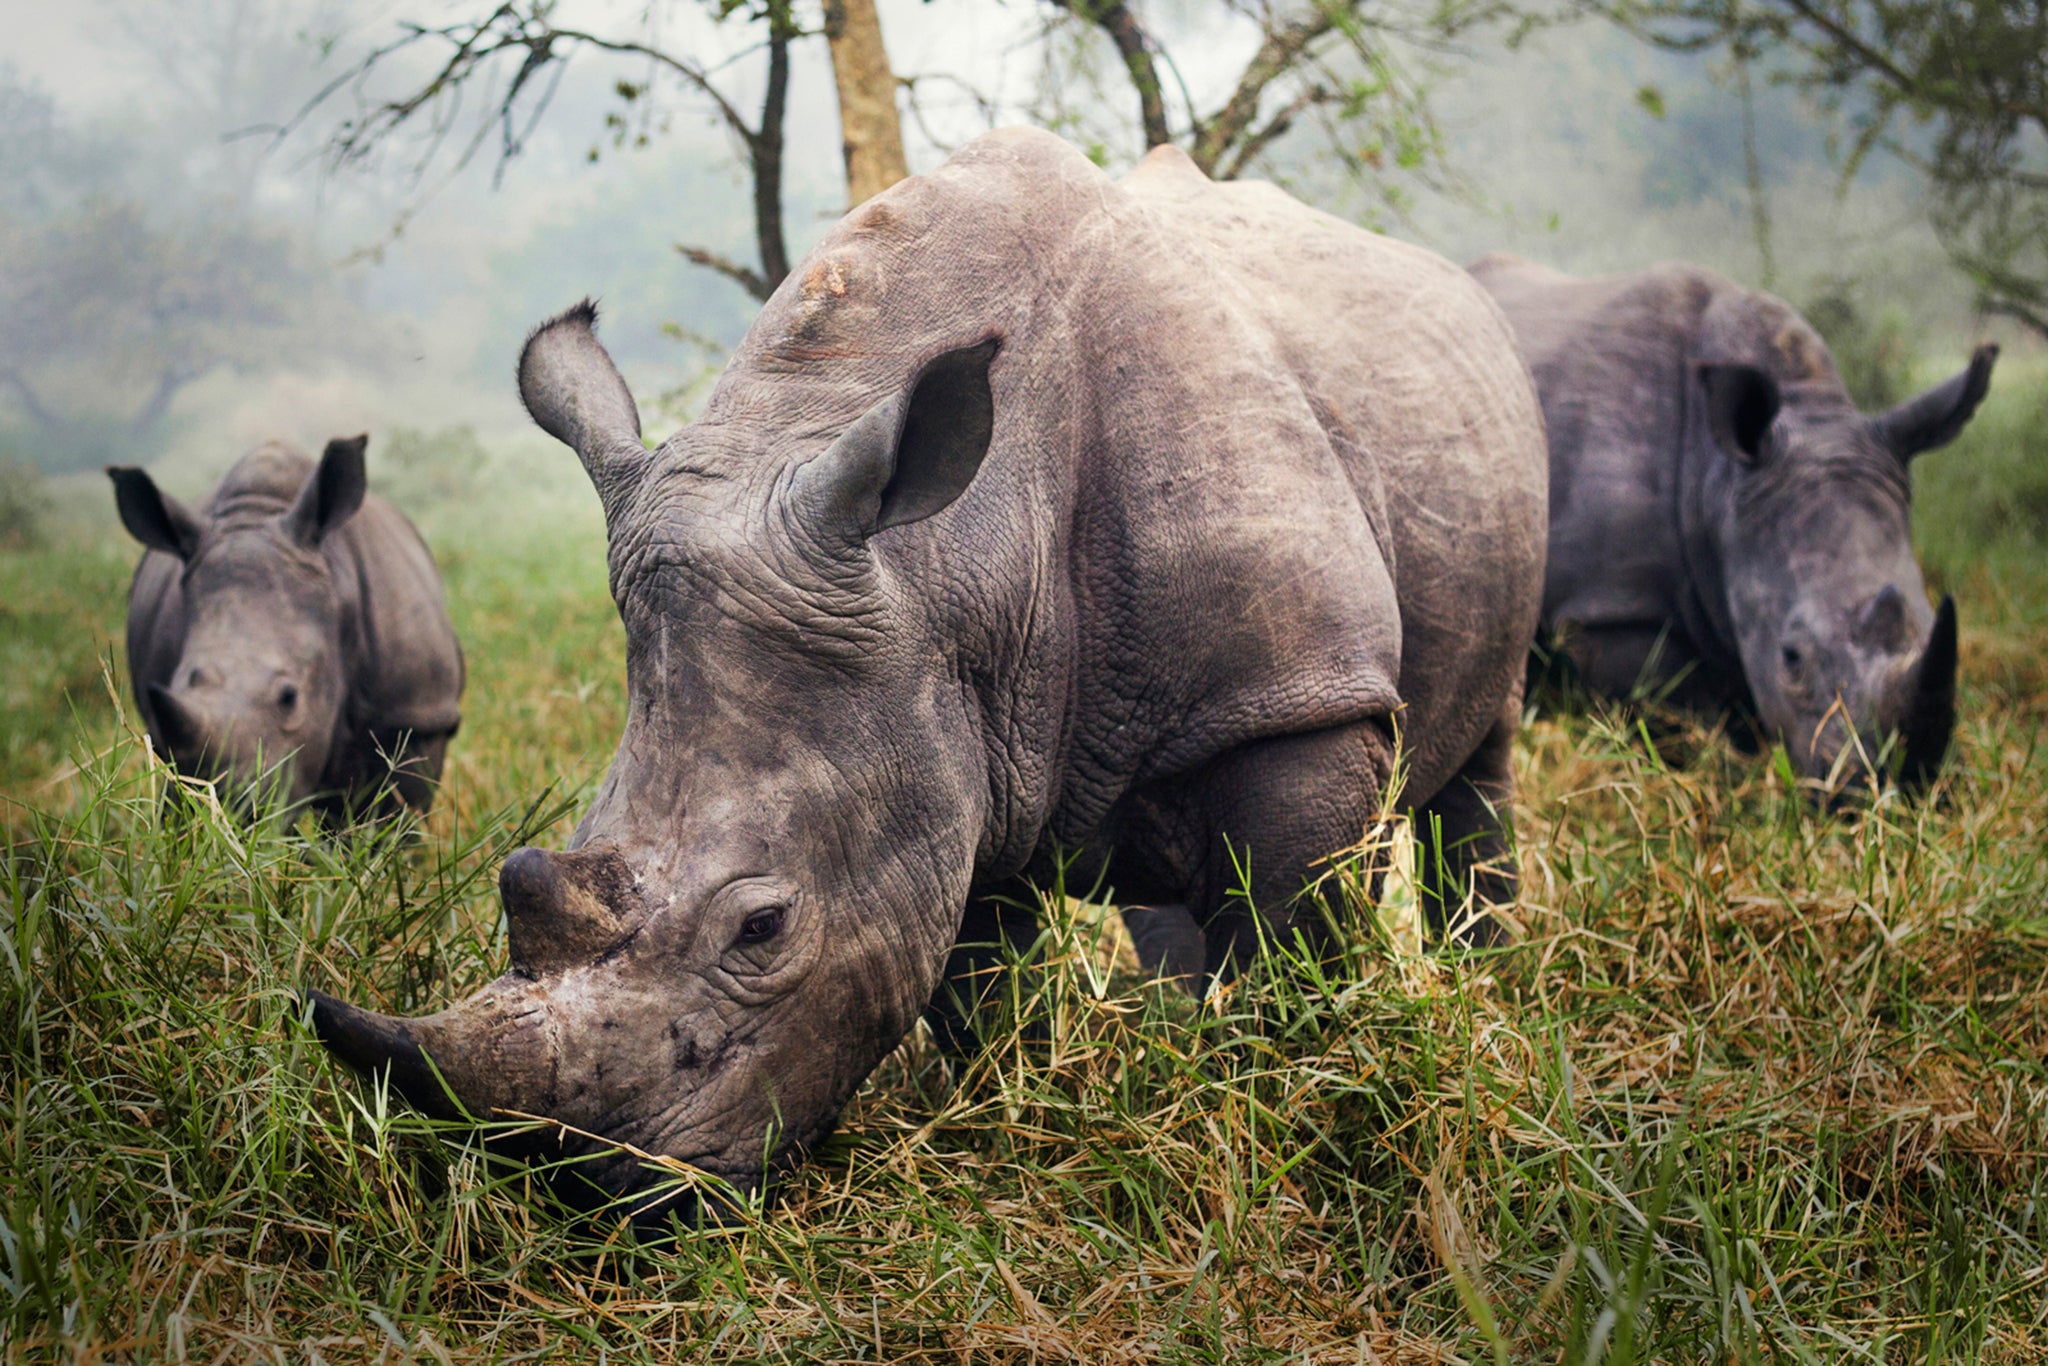 White rhinos are increasingly endangered as their horns are sought by poachers for medicinal purposes. File photo